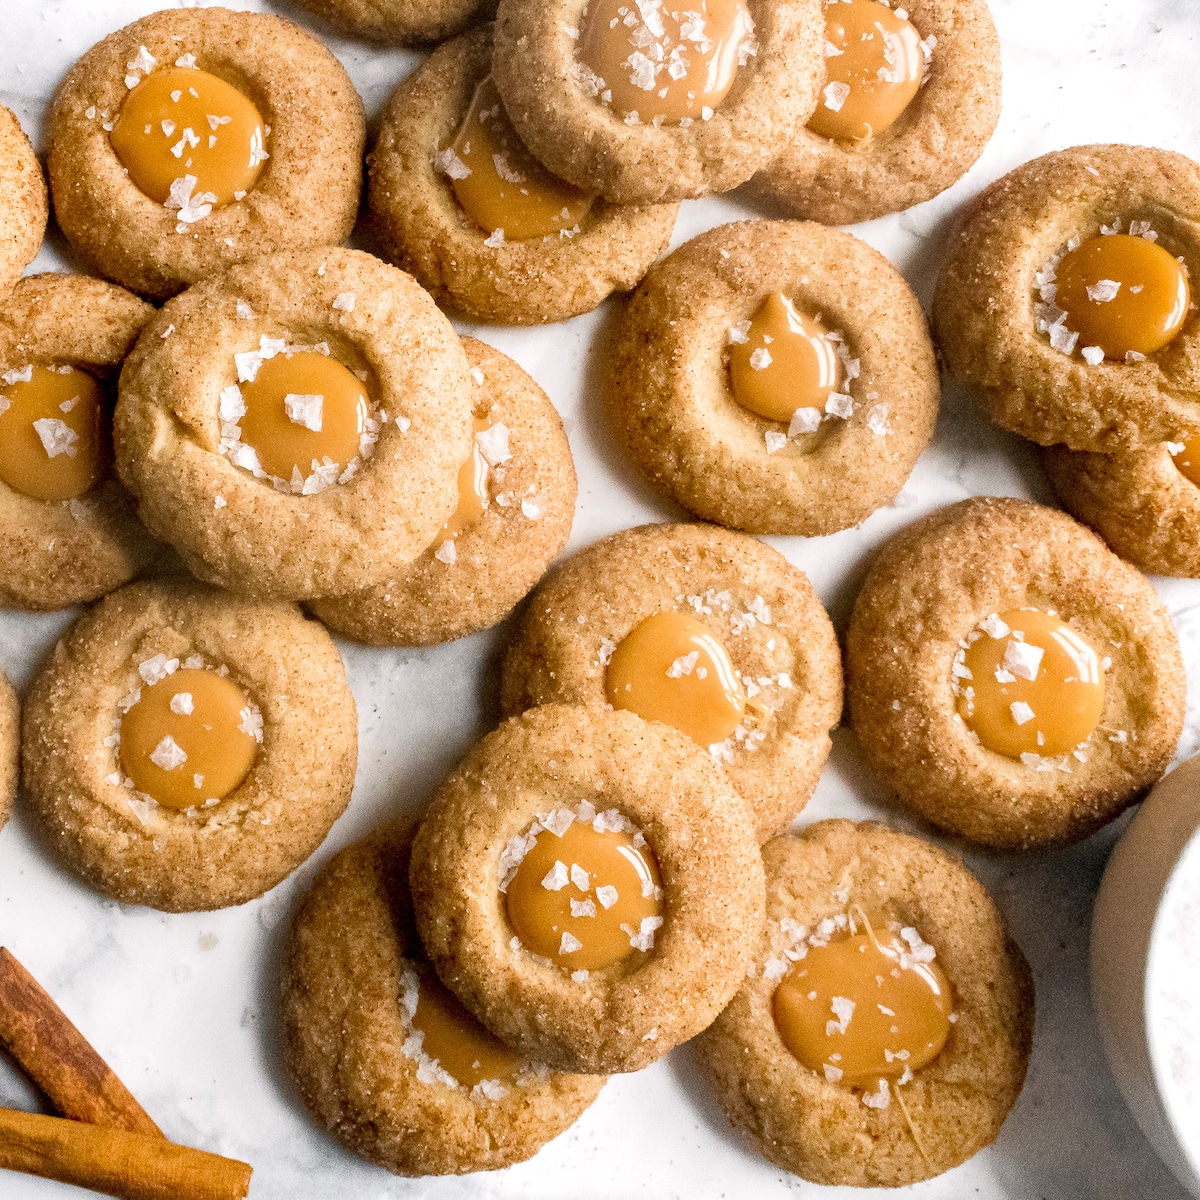 Salted caramel thumbprint cookies with cinnamon sticks in the background.